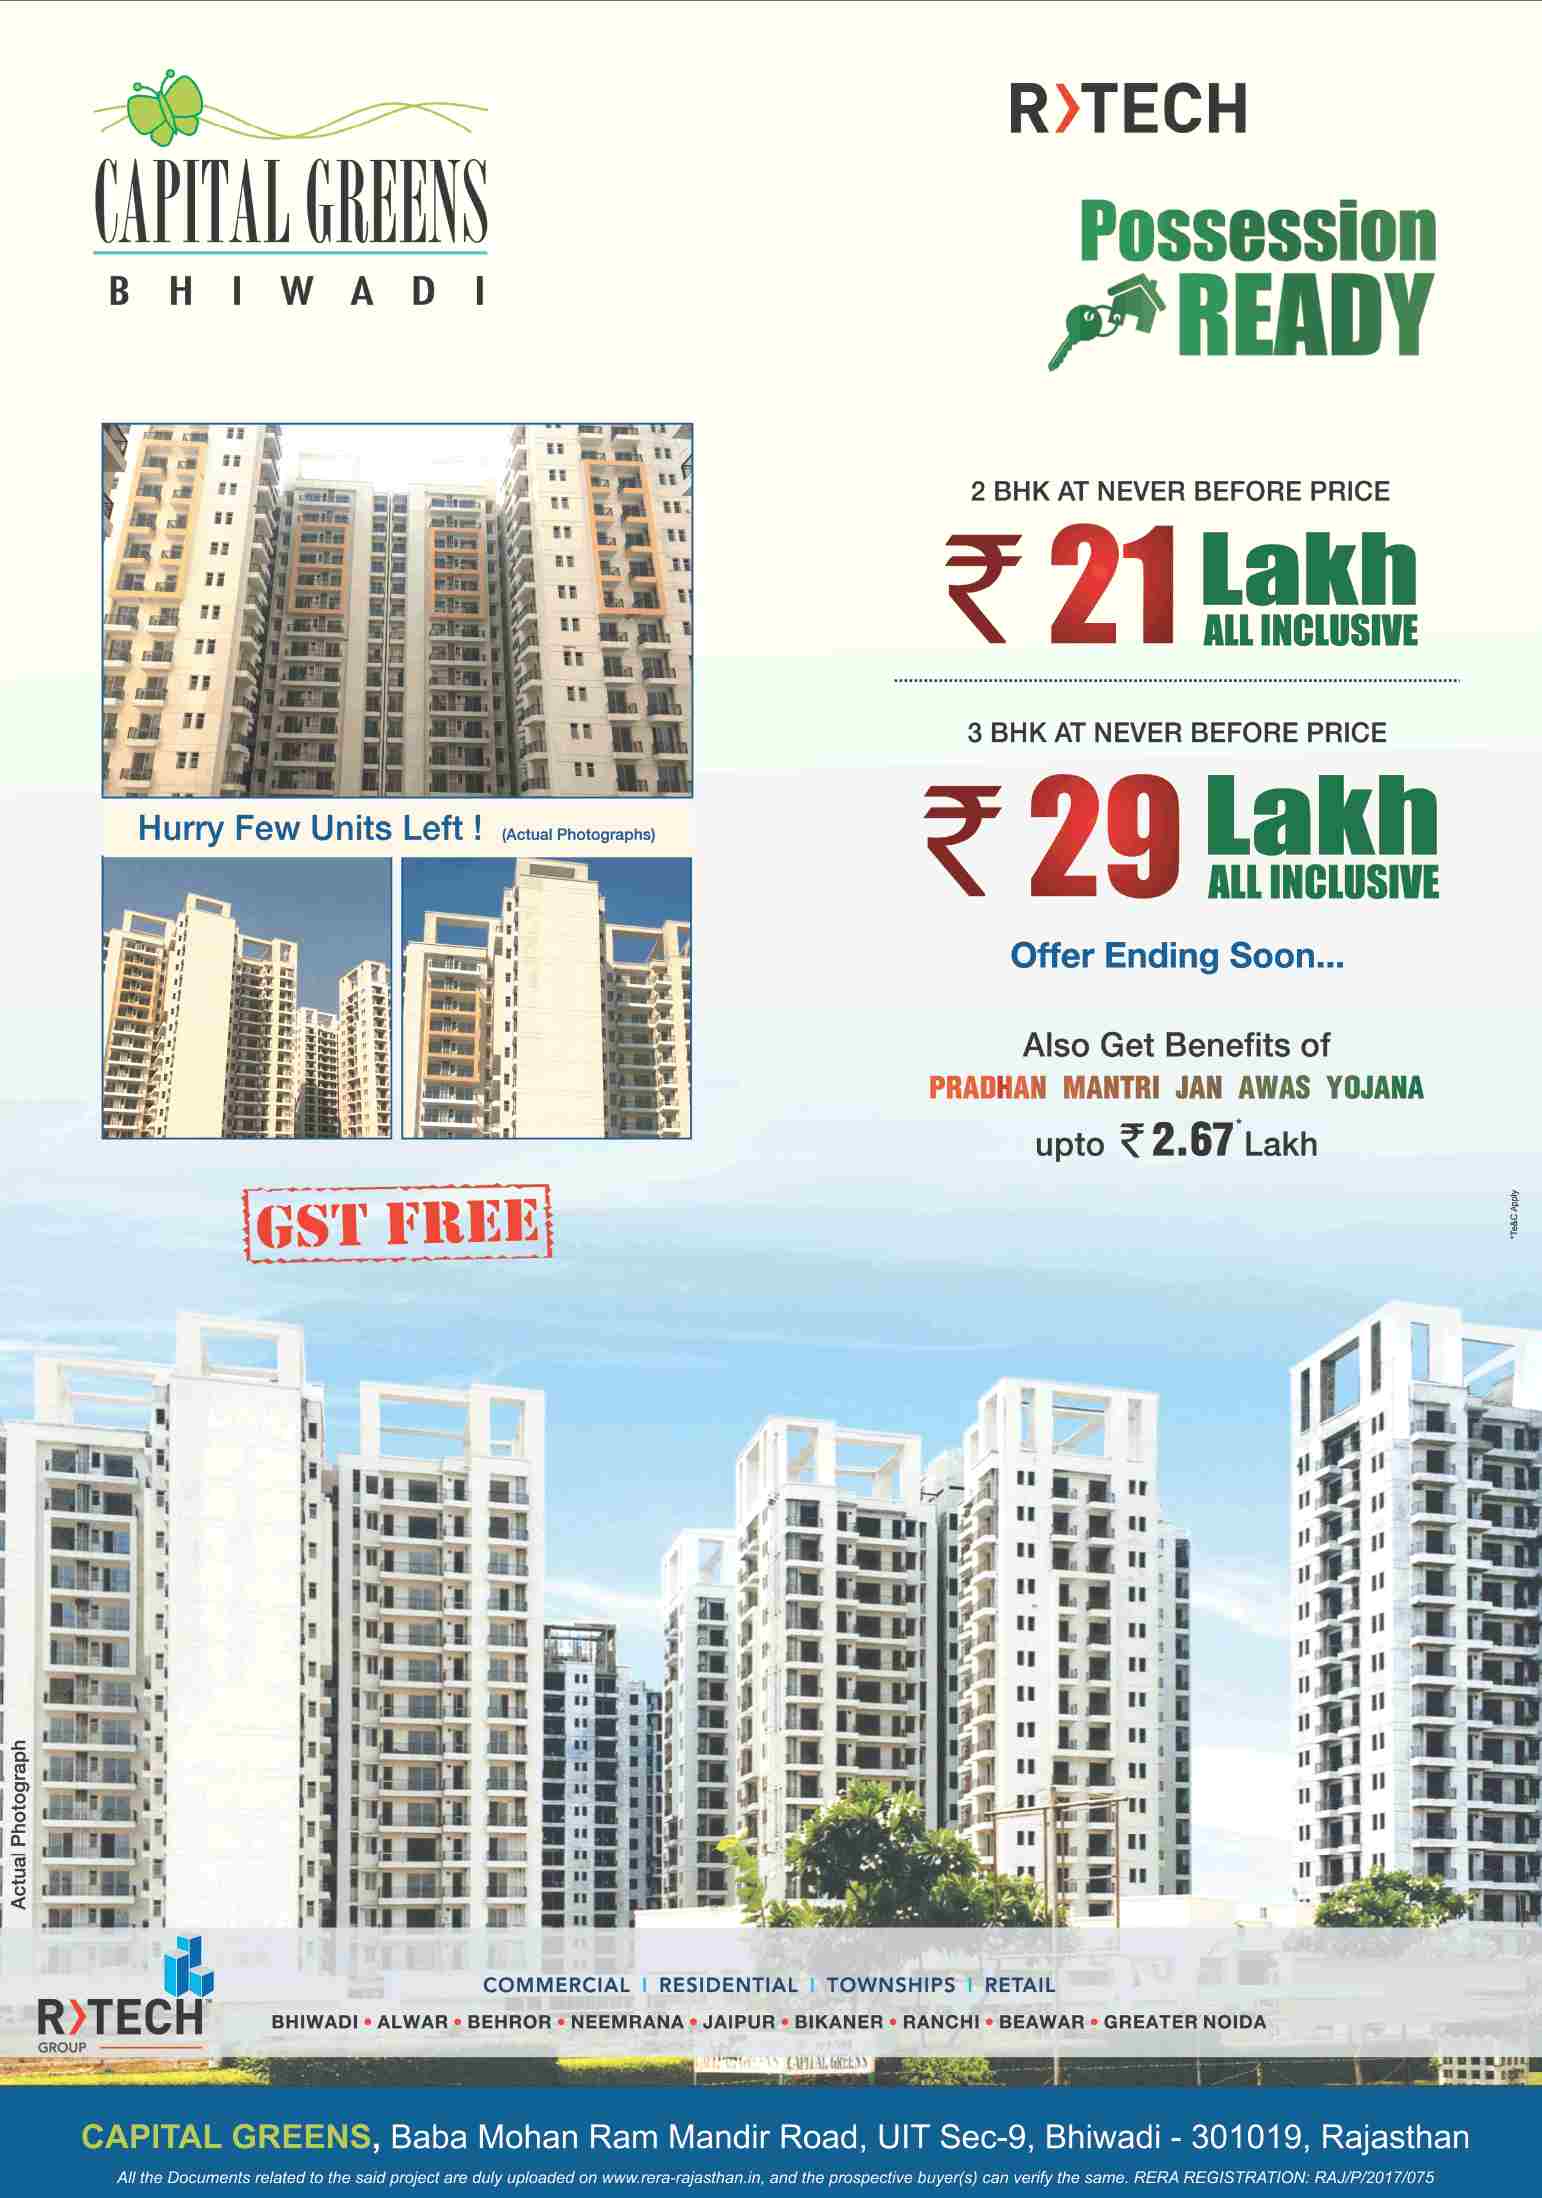 Live in ready possession homes at R Tech Capital Greens in Bhiwadi Update